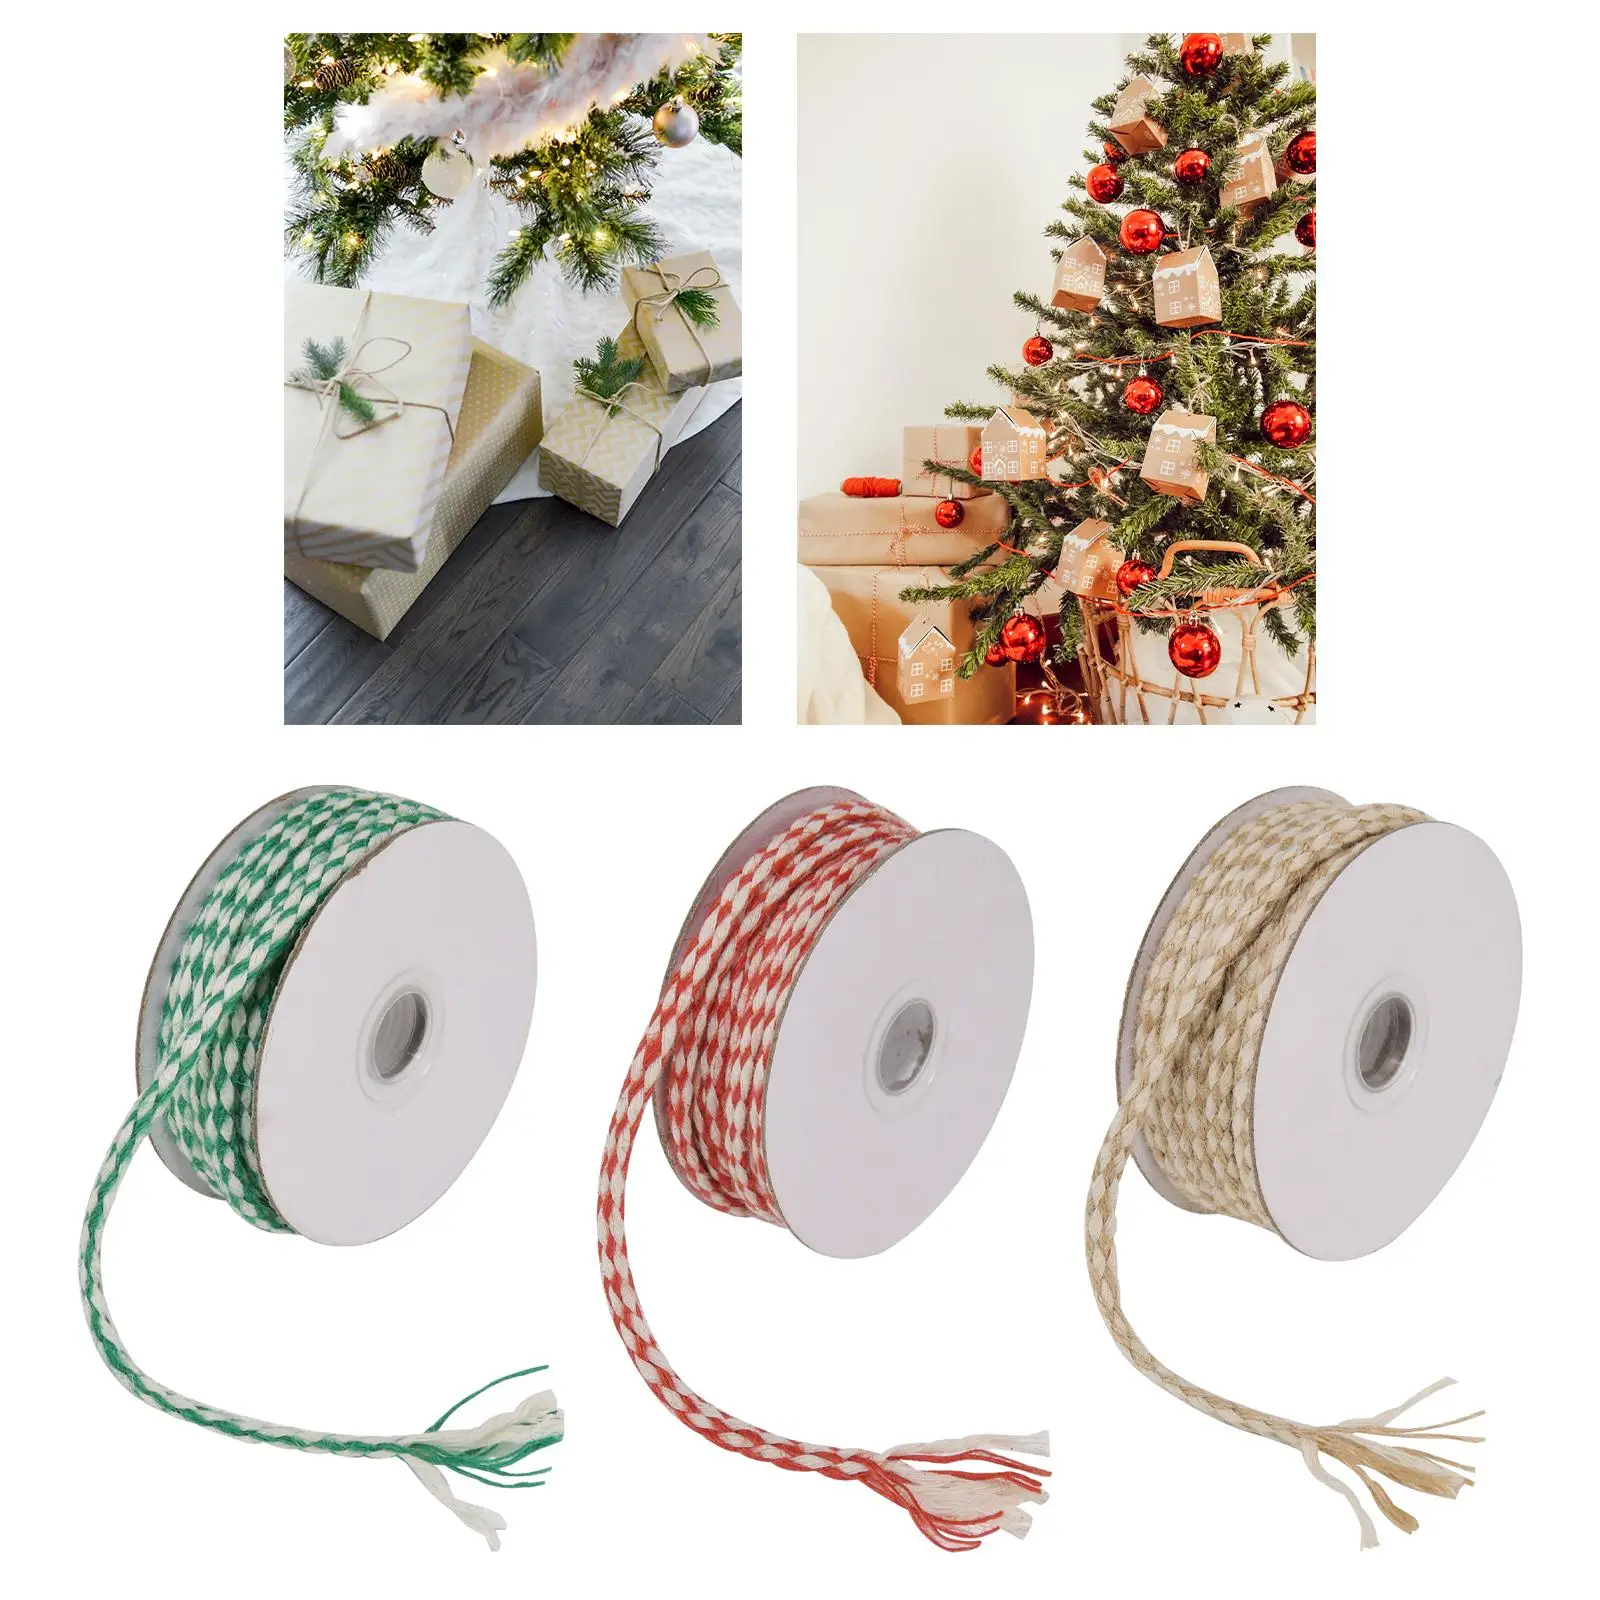 Present Wrapping Cord Crafts 10M Christmas Cotton Twine Roll Decoration